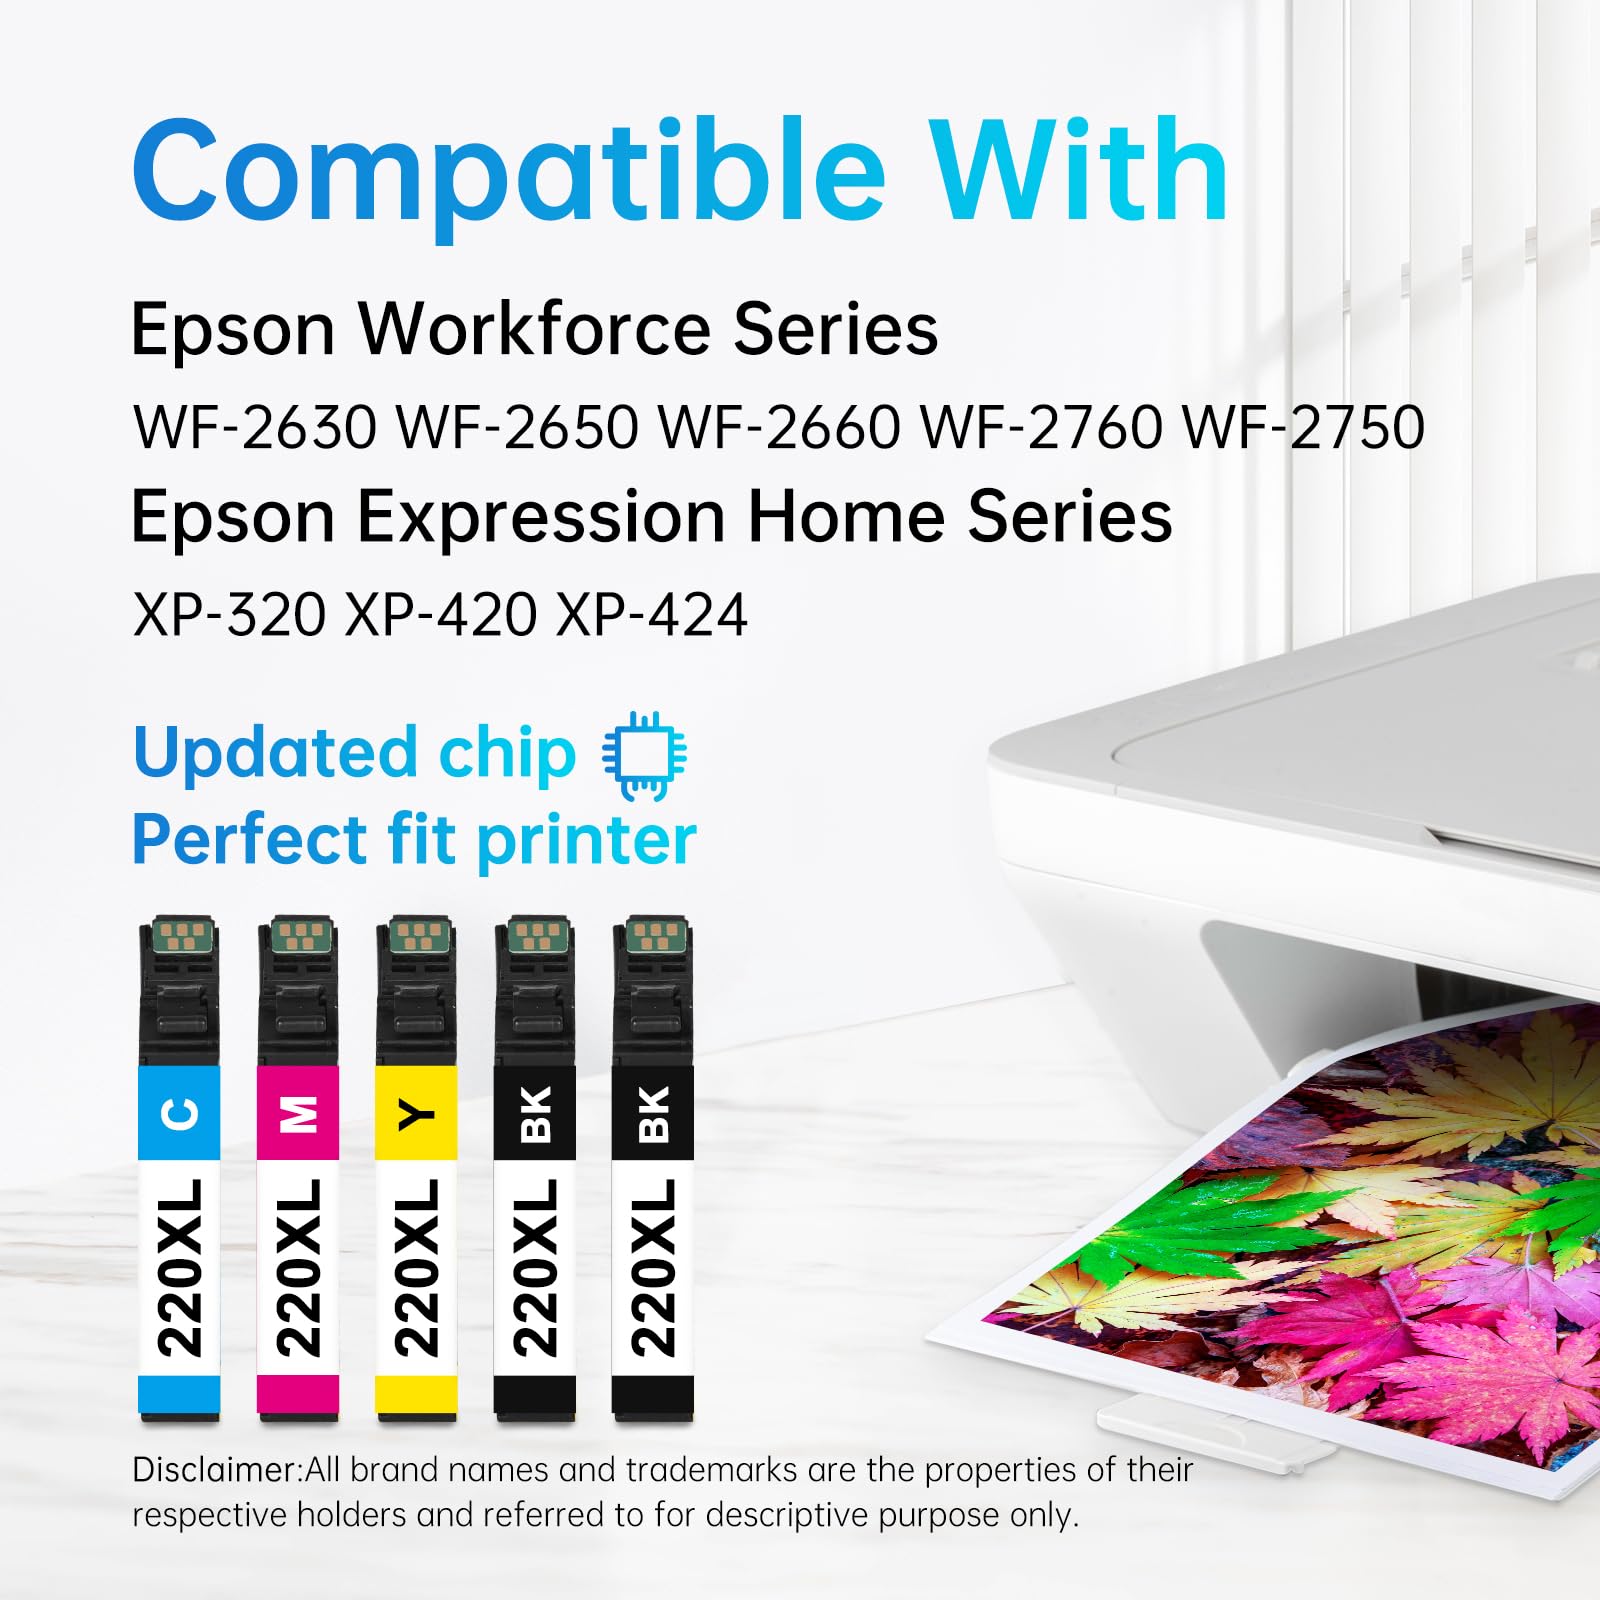 LEMERO 220XL Ink Cartridge Replacement Pack Compatible with Epson Workforce and Expression Series, Featuring Updated Chip Technology for Smooth Printing.Pack of LEMERO 220XL High-Capacity Ink Cartridges, Compatible with Epson WF-2630, WF-2650, WF-2660, WF-2760, WF-2750, XP-320, XP-420, XP-424 Printers.